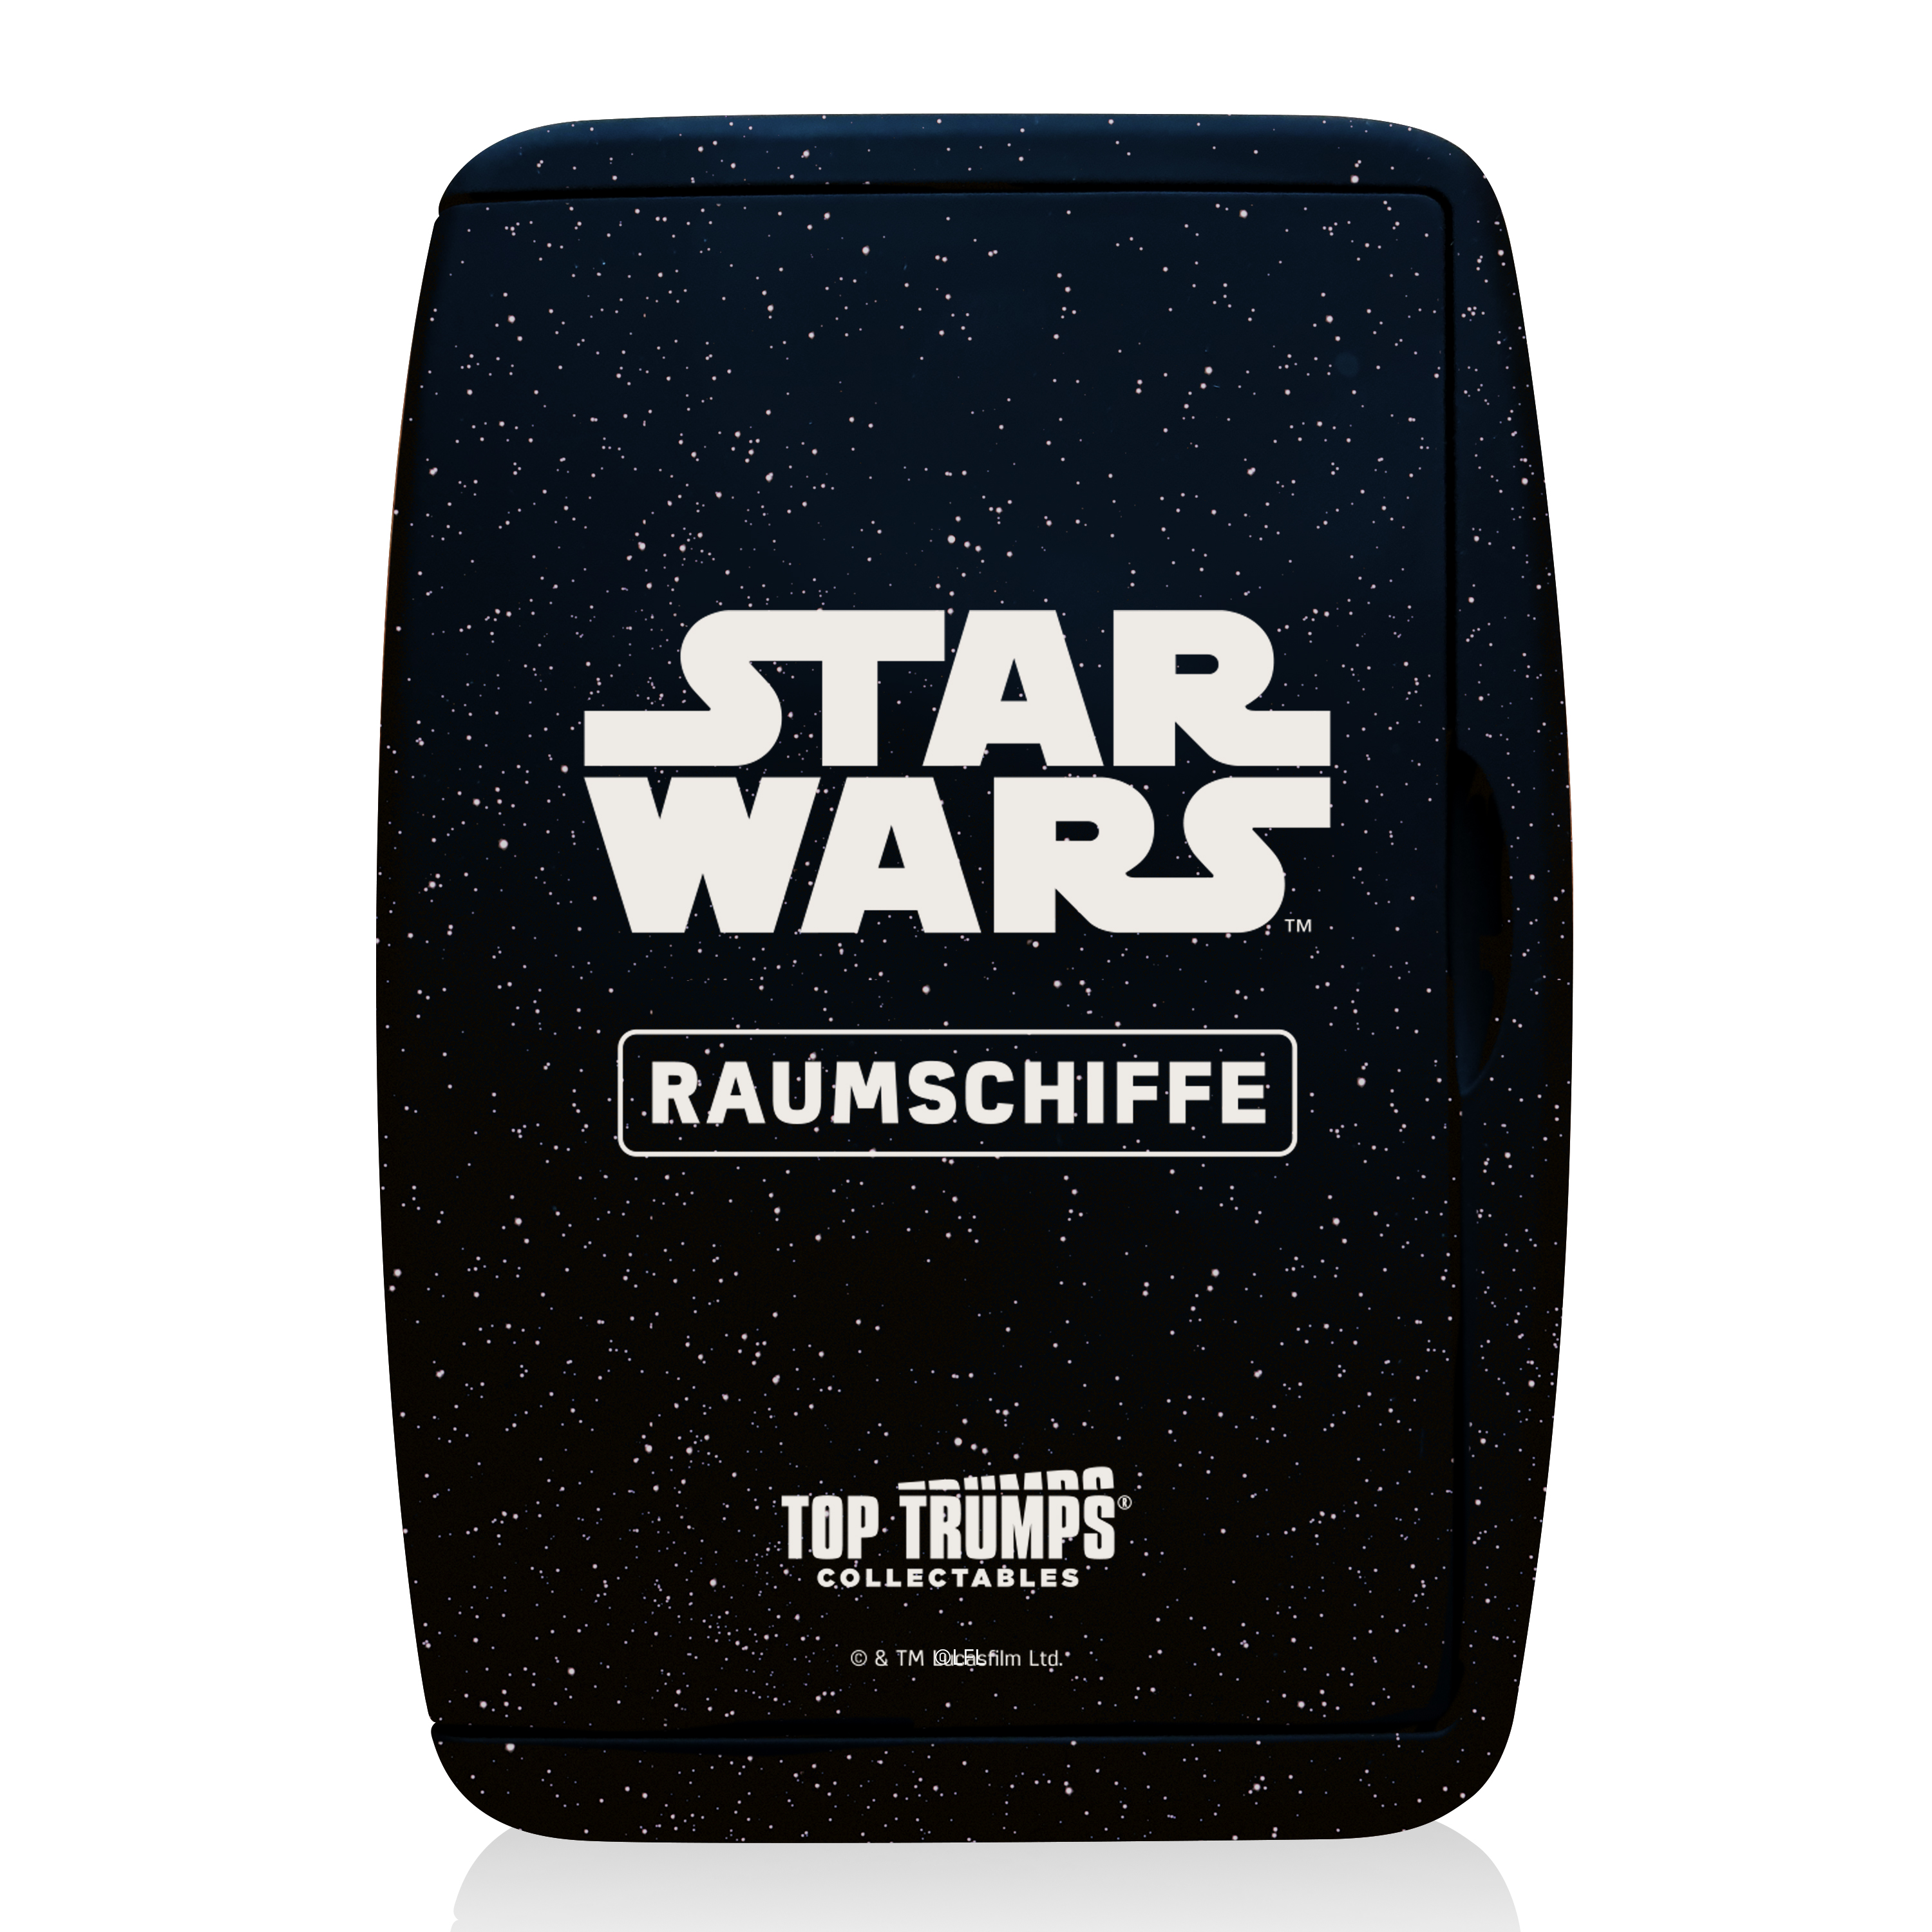 Top Trumps Collectables - Star Wars Raumschiffe  